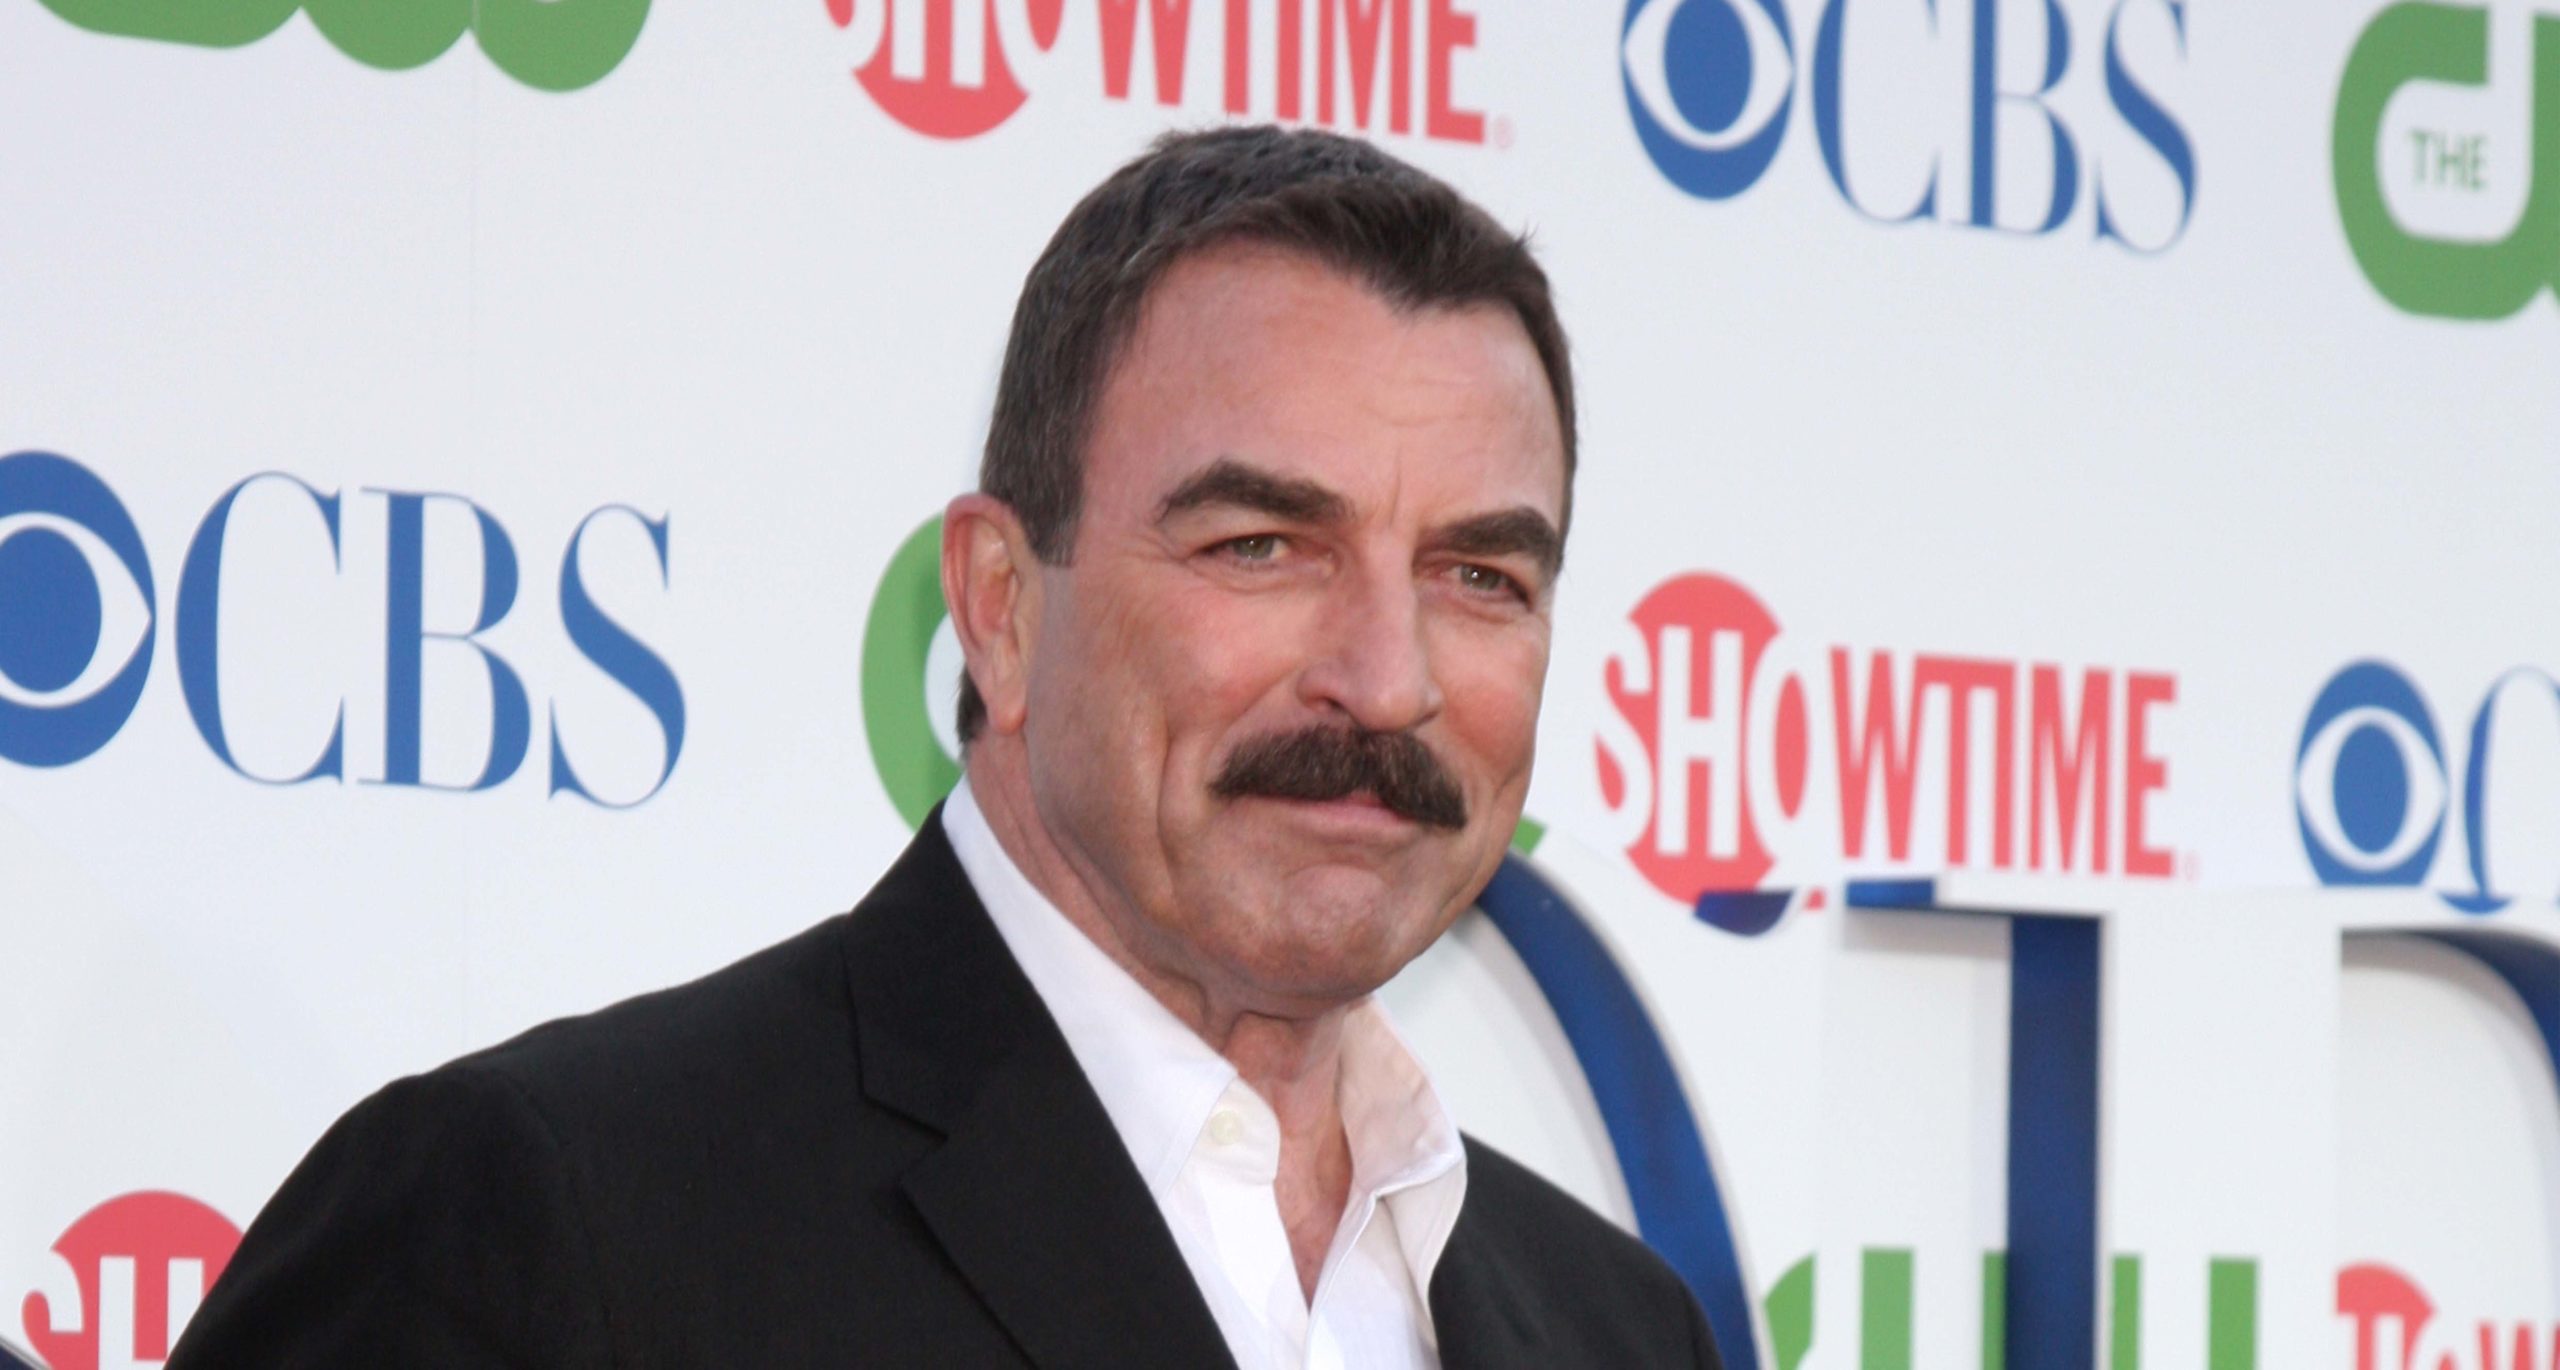 The latest pictures of Tom Selleck confirms what many of us suspected